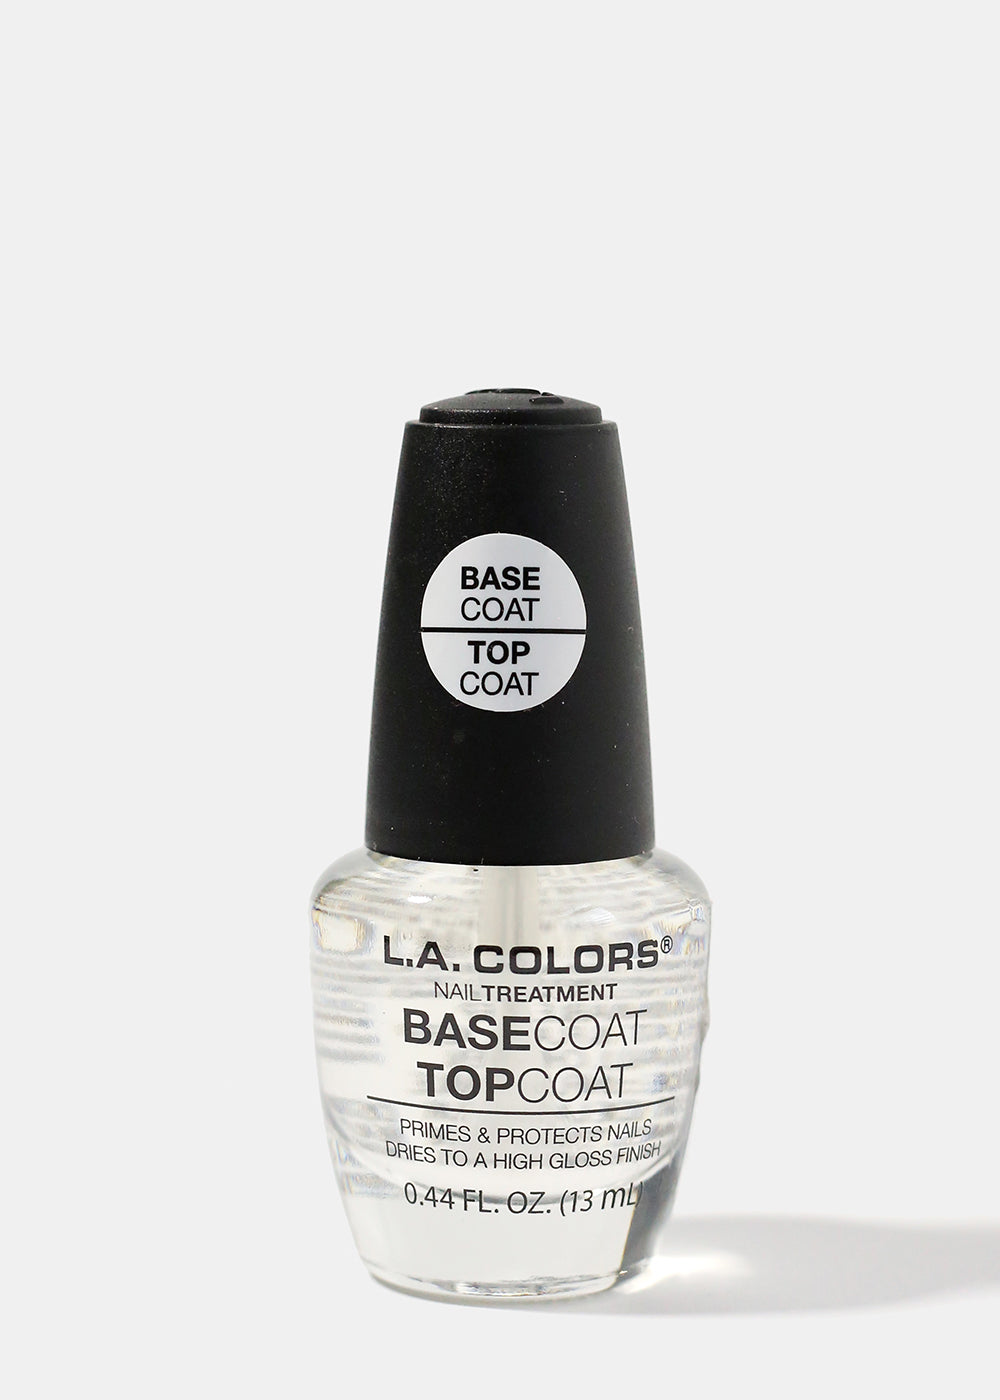 L.A. Colors Nail Lacquer Swatch | ☆ Galaxy Star 7 ☆